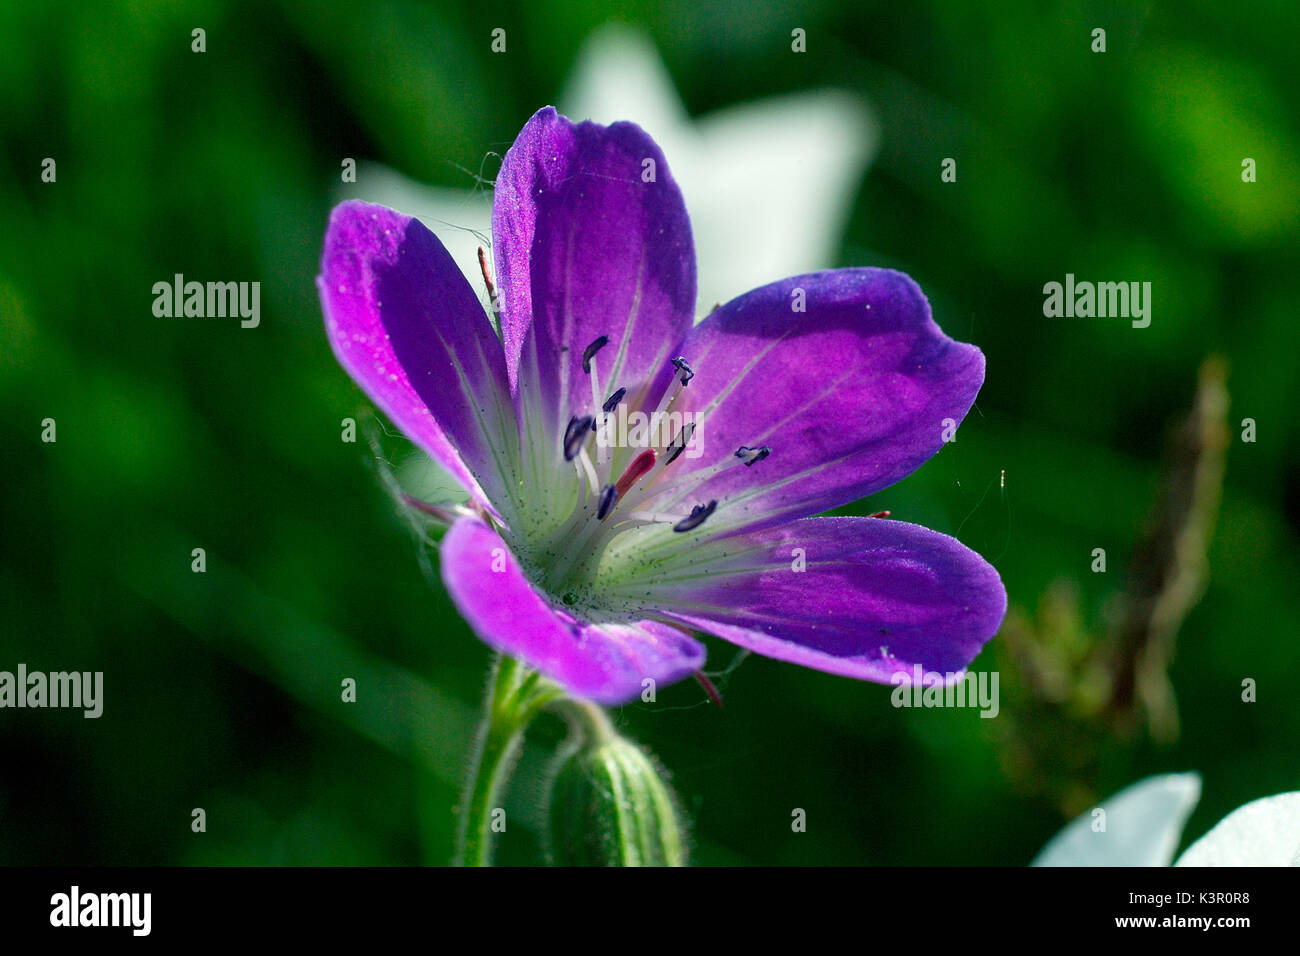 Geranium sylvaticum, wood cranesbill, woodland geranium, is a species of hardy flowering plant in the Geraniaceae family, native to Europe and northern Turkey. Lombardy Italy Europe Stock Photo